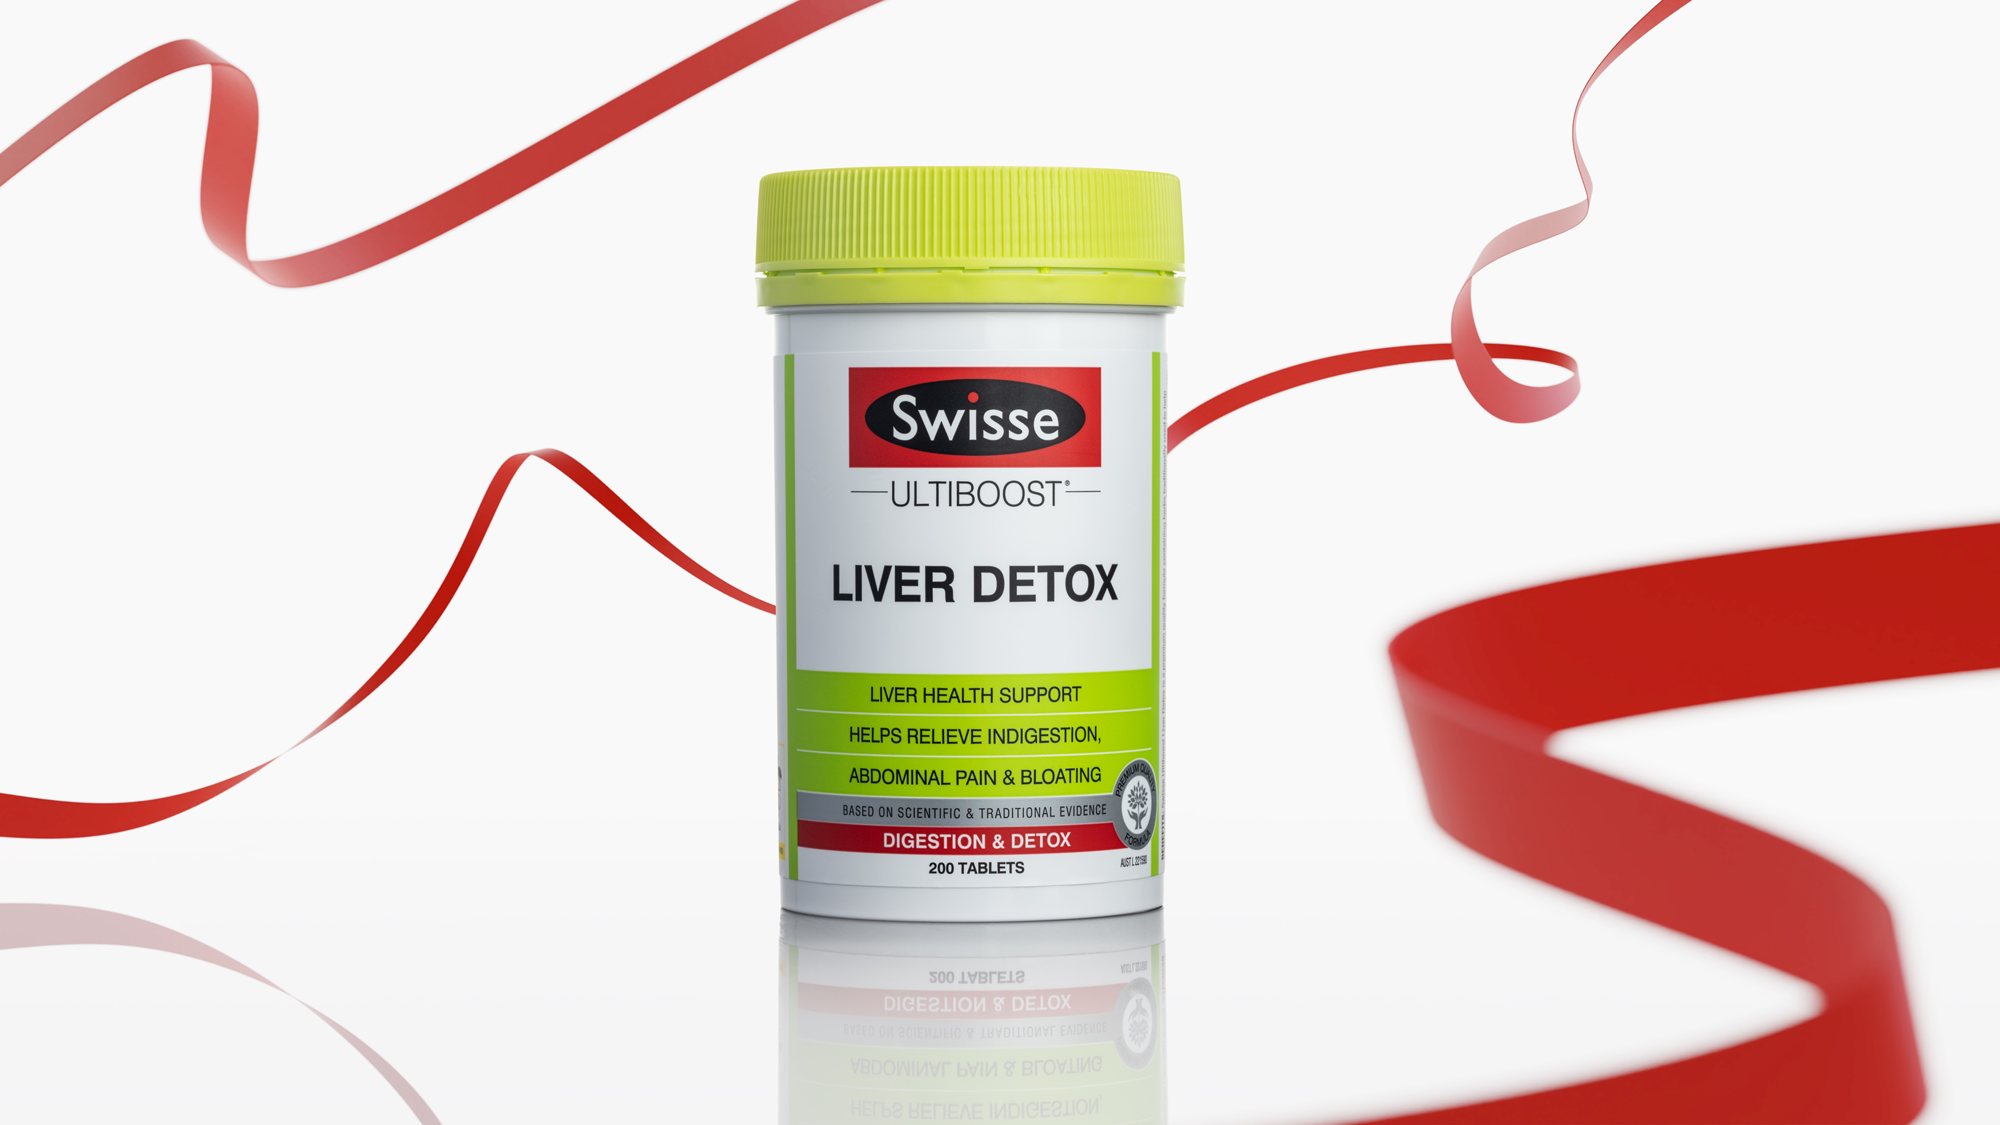 Swisse Liver Detox By Wenbo Zhao Photography Sydney with red ribbon and white background